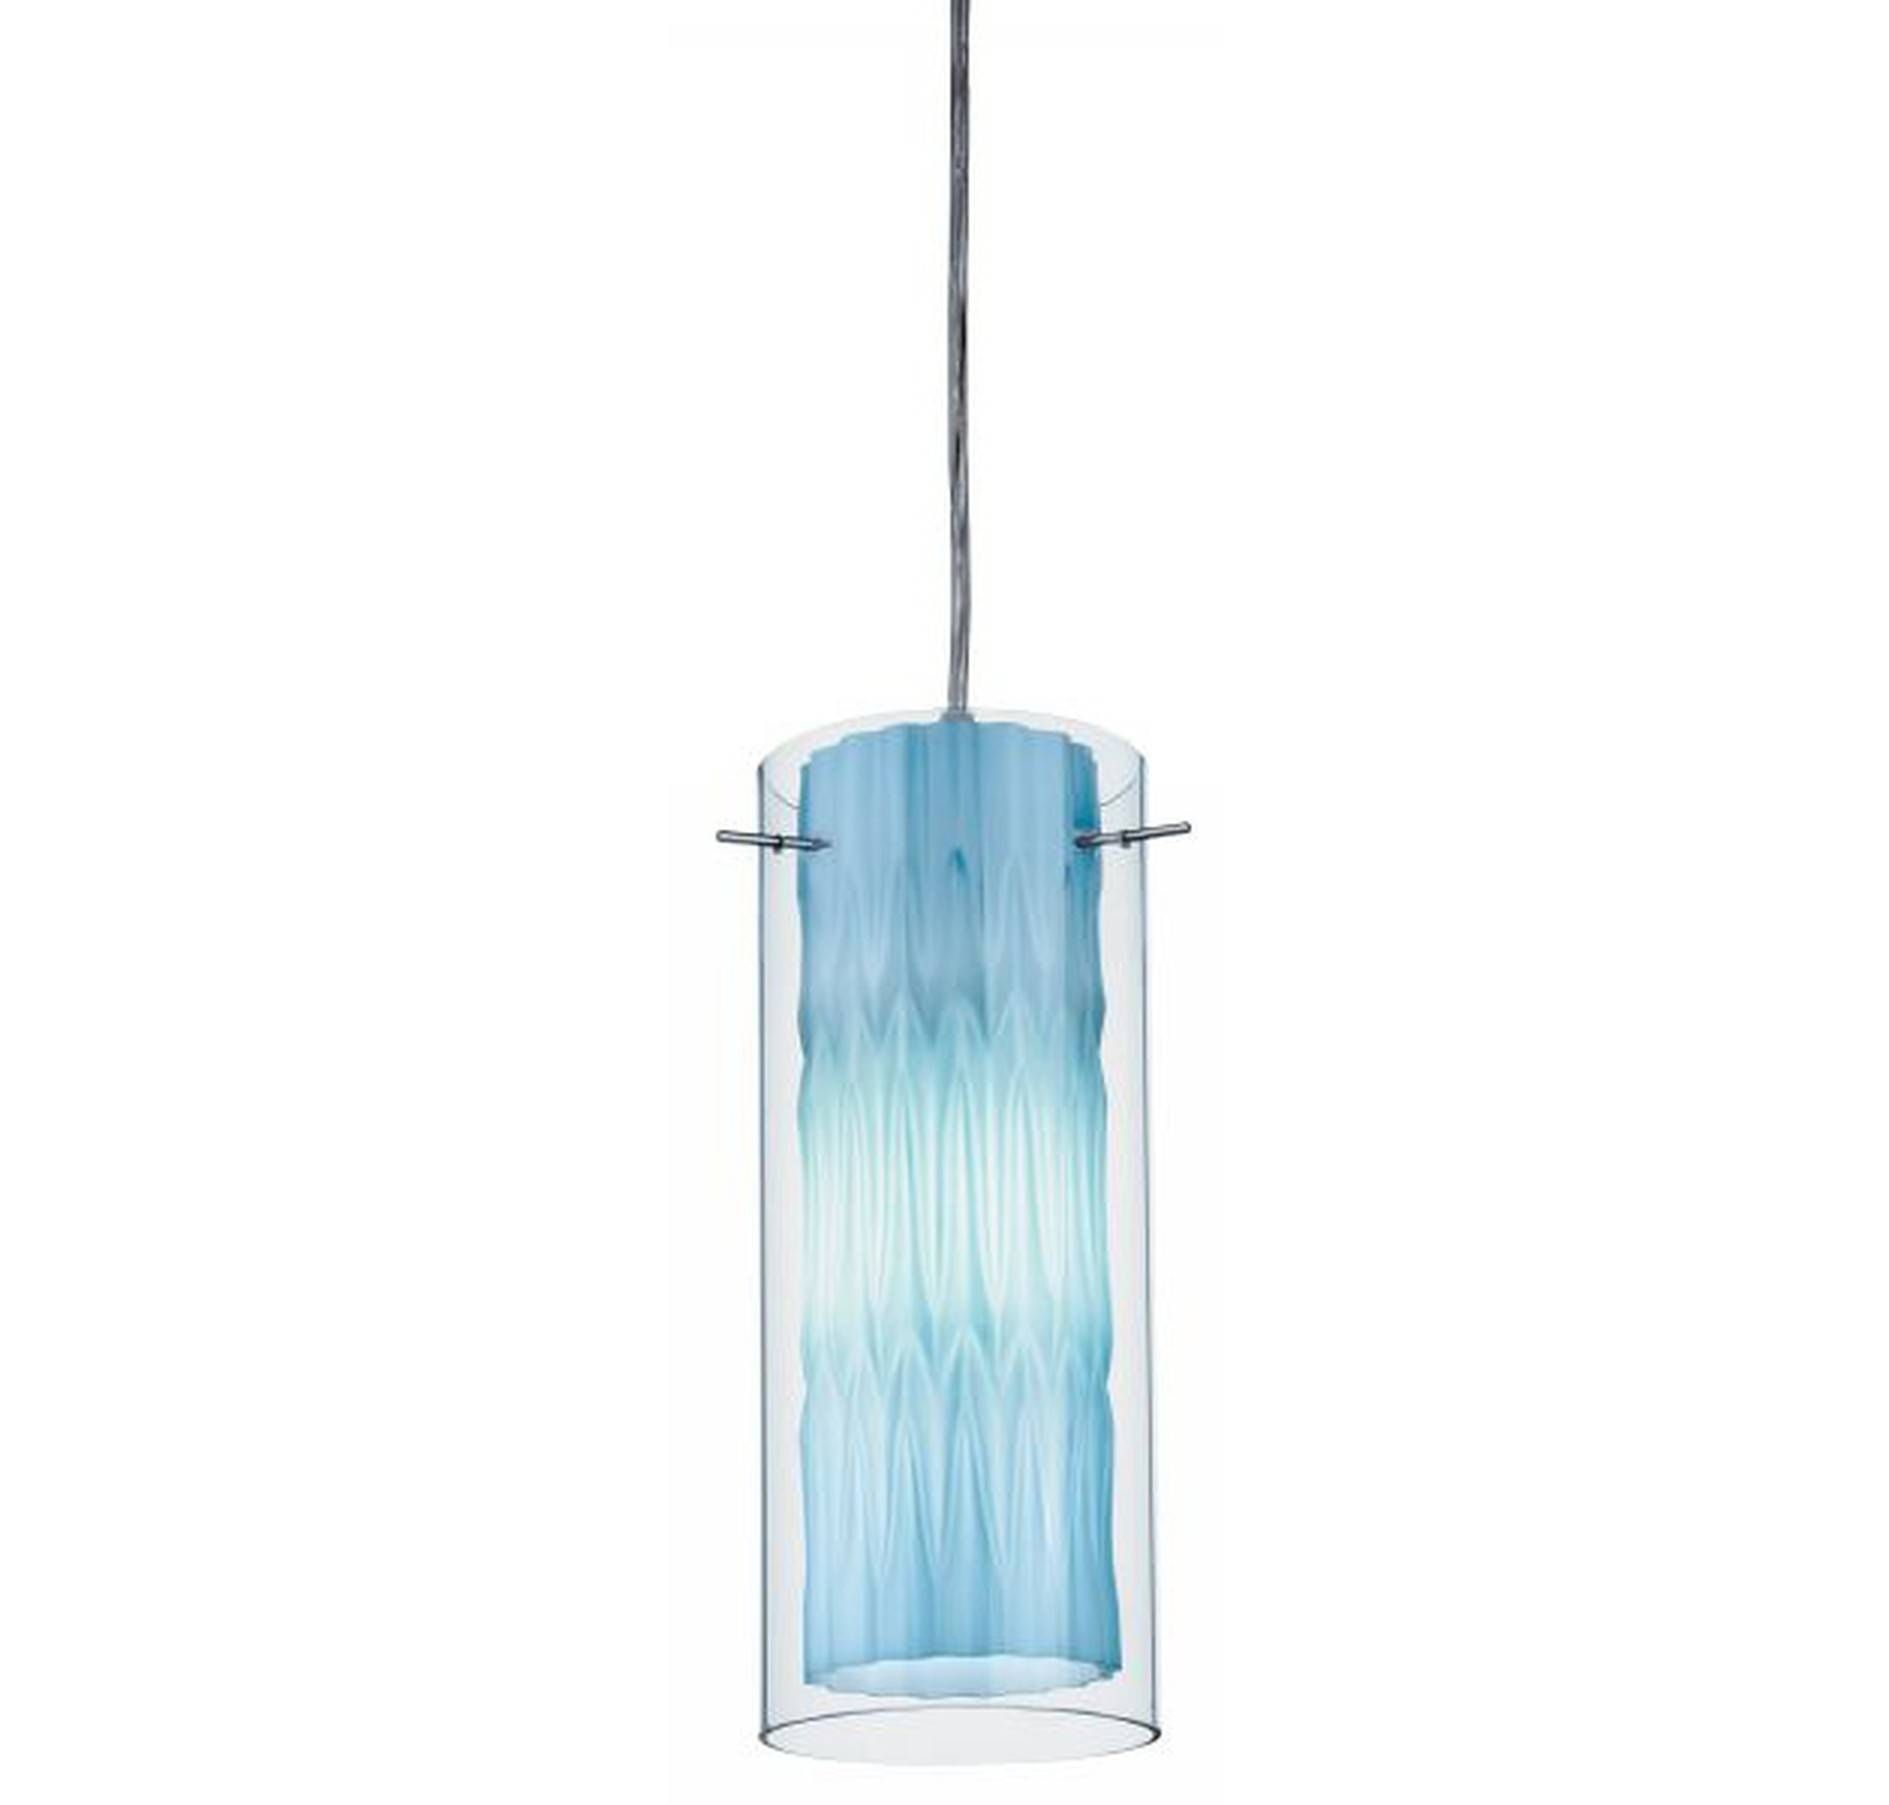 Beautiful Blue Pendant Lights Pertaining To House Design Ideas Within Blue Pendant Lights Fixtures (View 15 of 15)